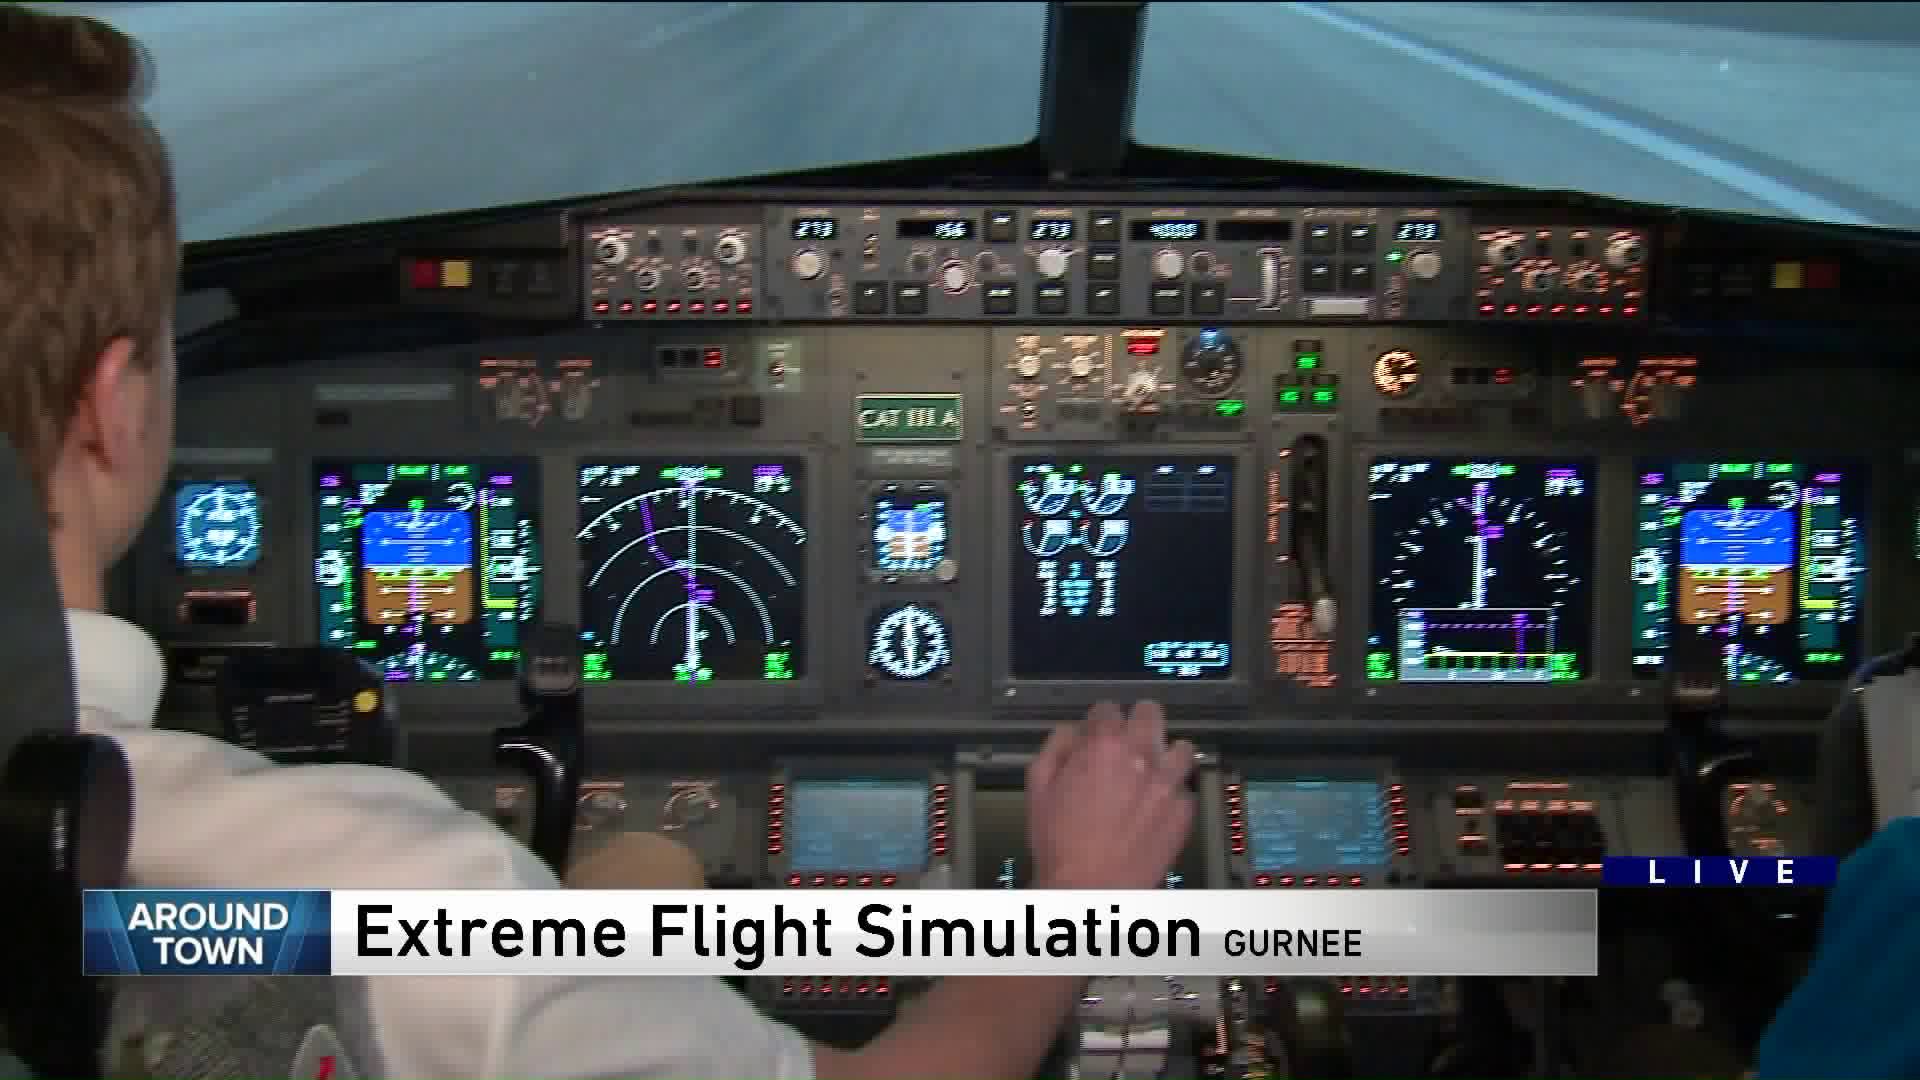 Around Town takes a trip with Extreme Flight Simulation